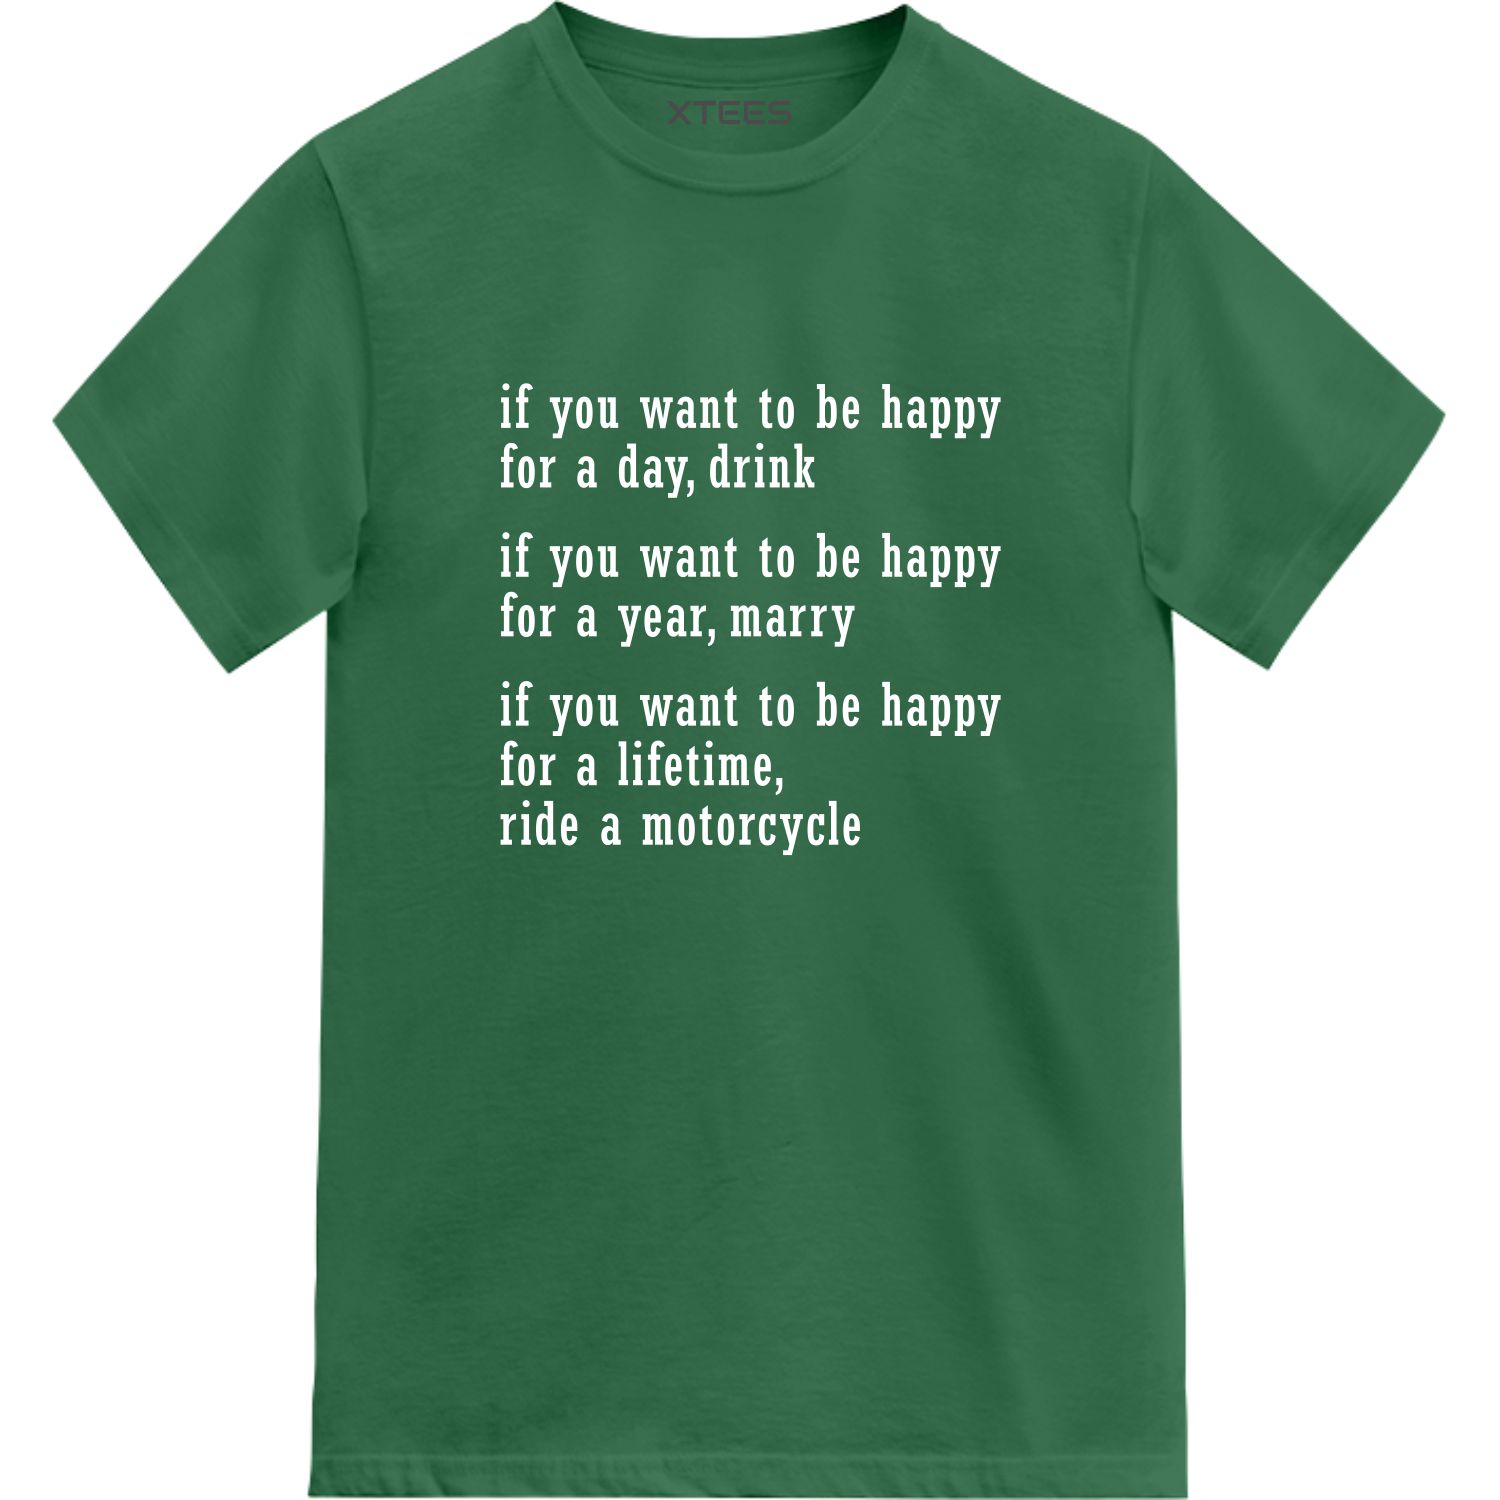 If U Want To Be Happy For A Lifetime Ride A Motorcycle Biker T-shirt India image